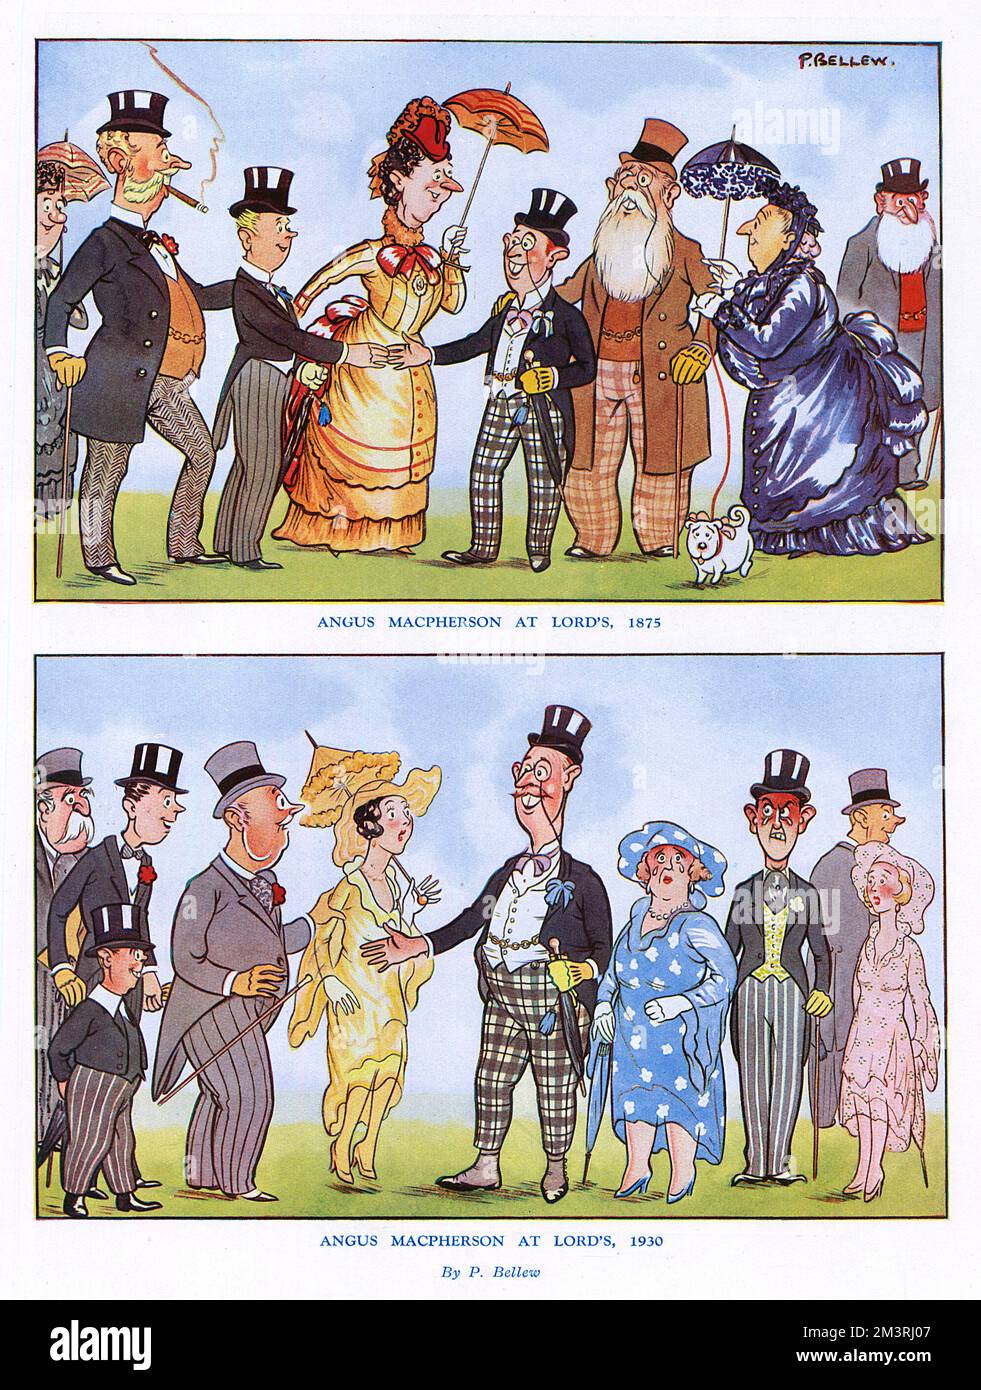 Angus Macpherson at Lord's, 1875 and 1930.  Social satire by cartoonist Patrick Bellew who shows how a young chap's flamboyant outfit of tartan trousers at Lord's cricket ground in the 1870s is not quite so appropriate in 1930 when he is considerably older and more rotund.  1930 Stock Photo